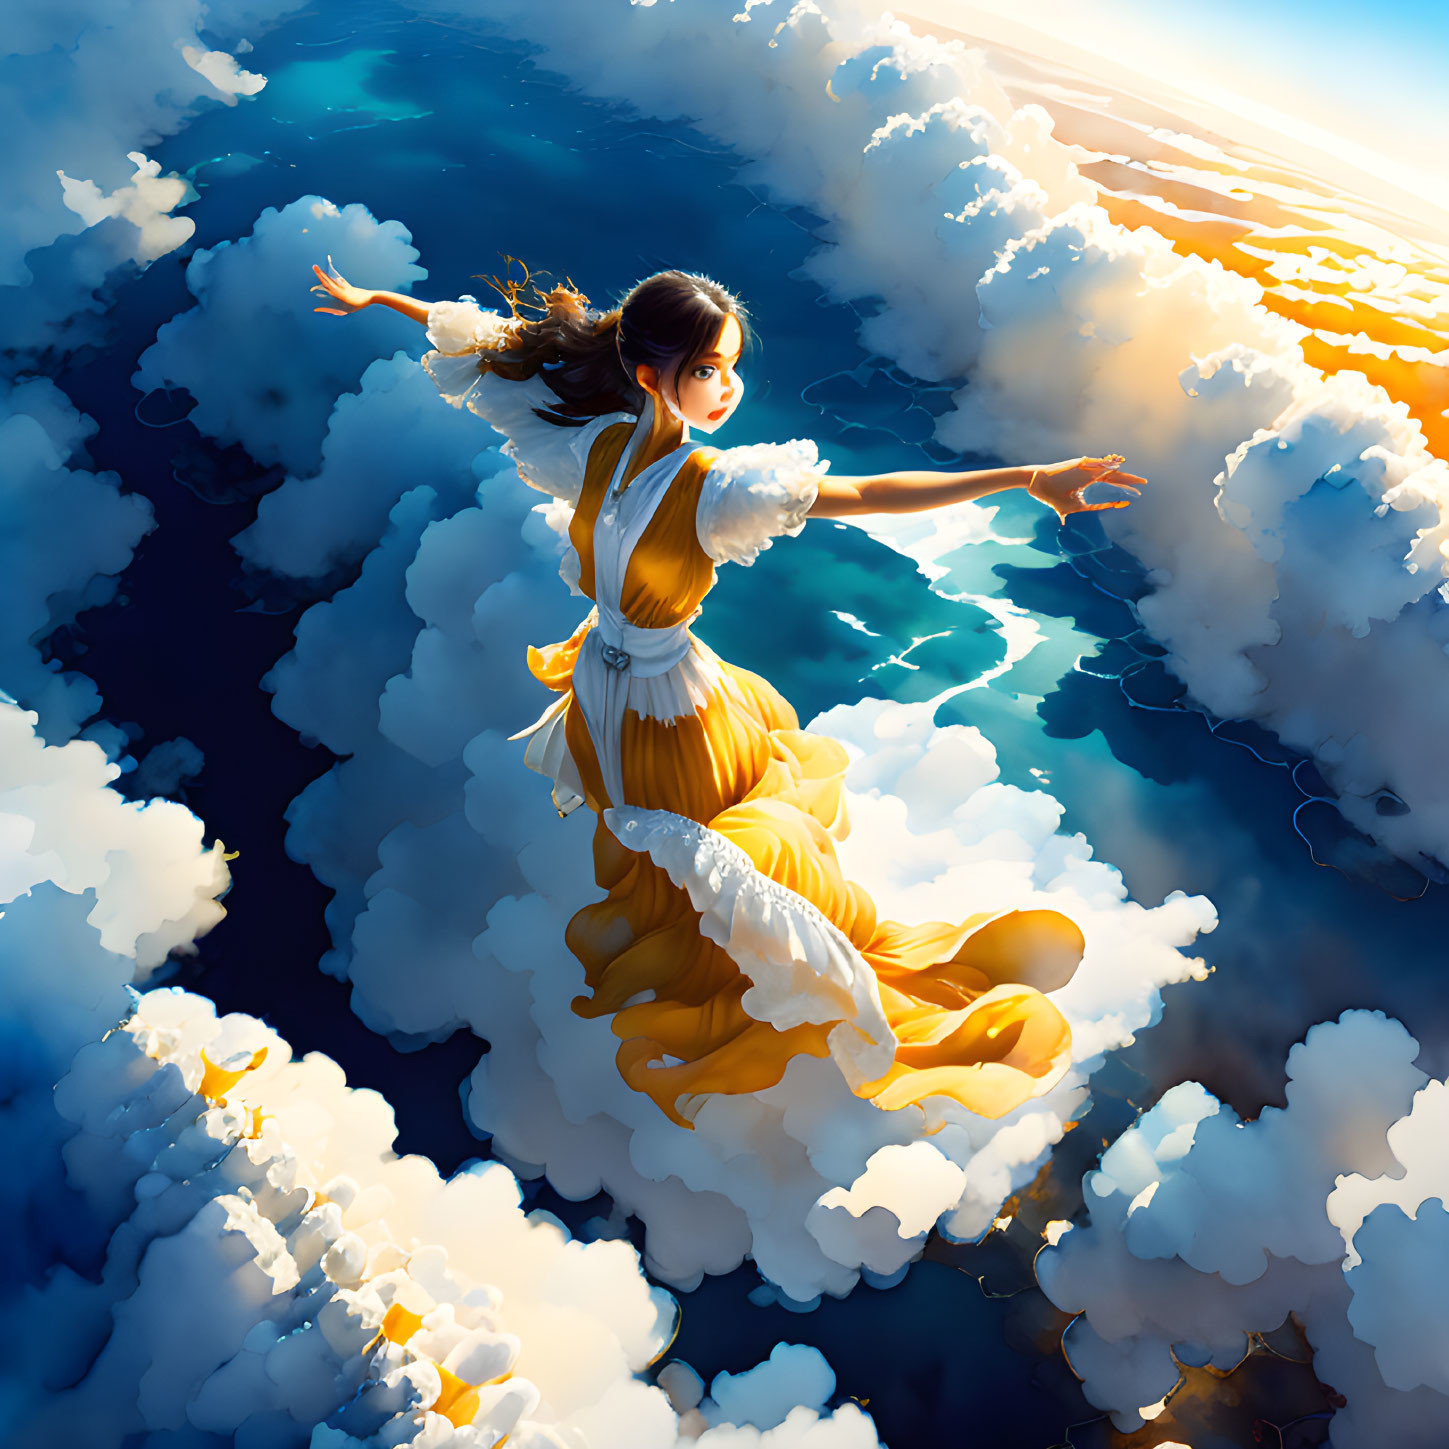 Girl flying in clouds